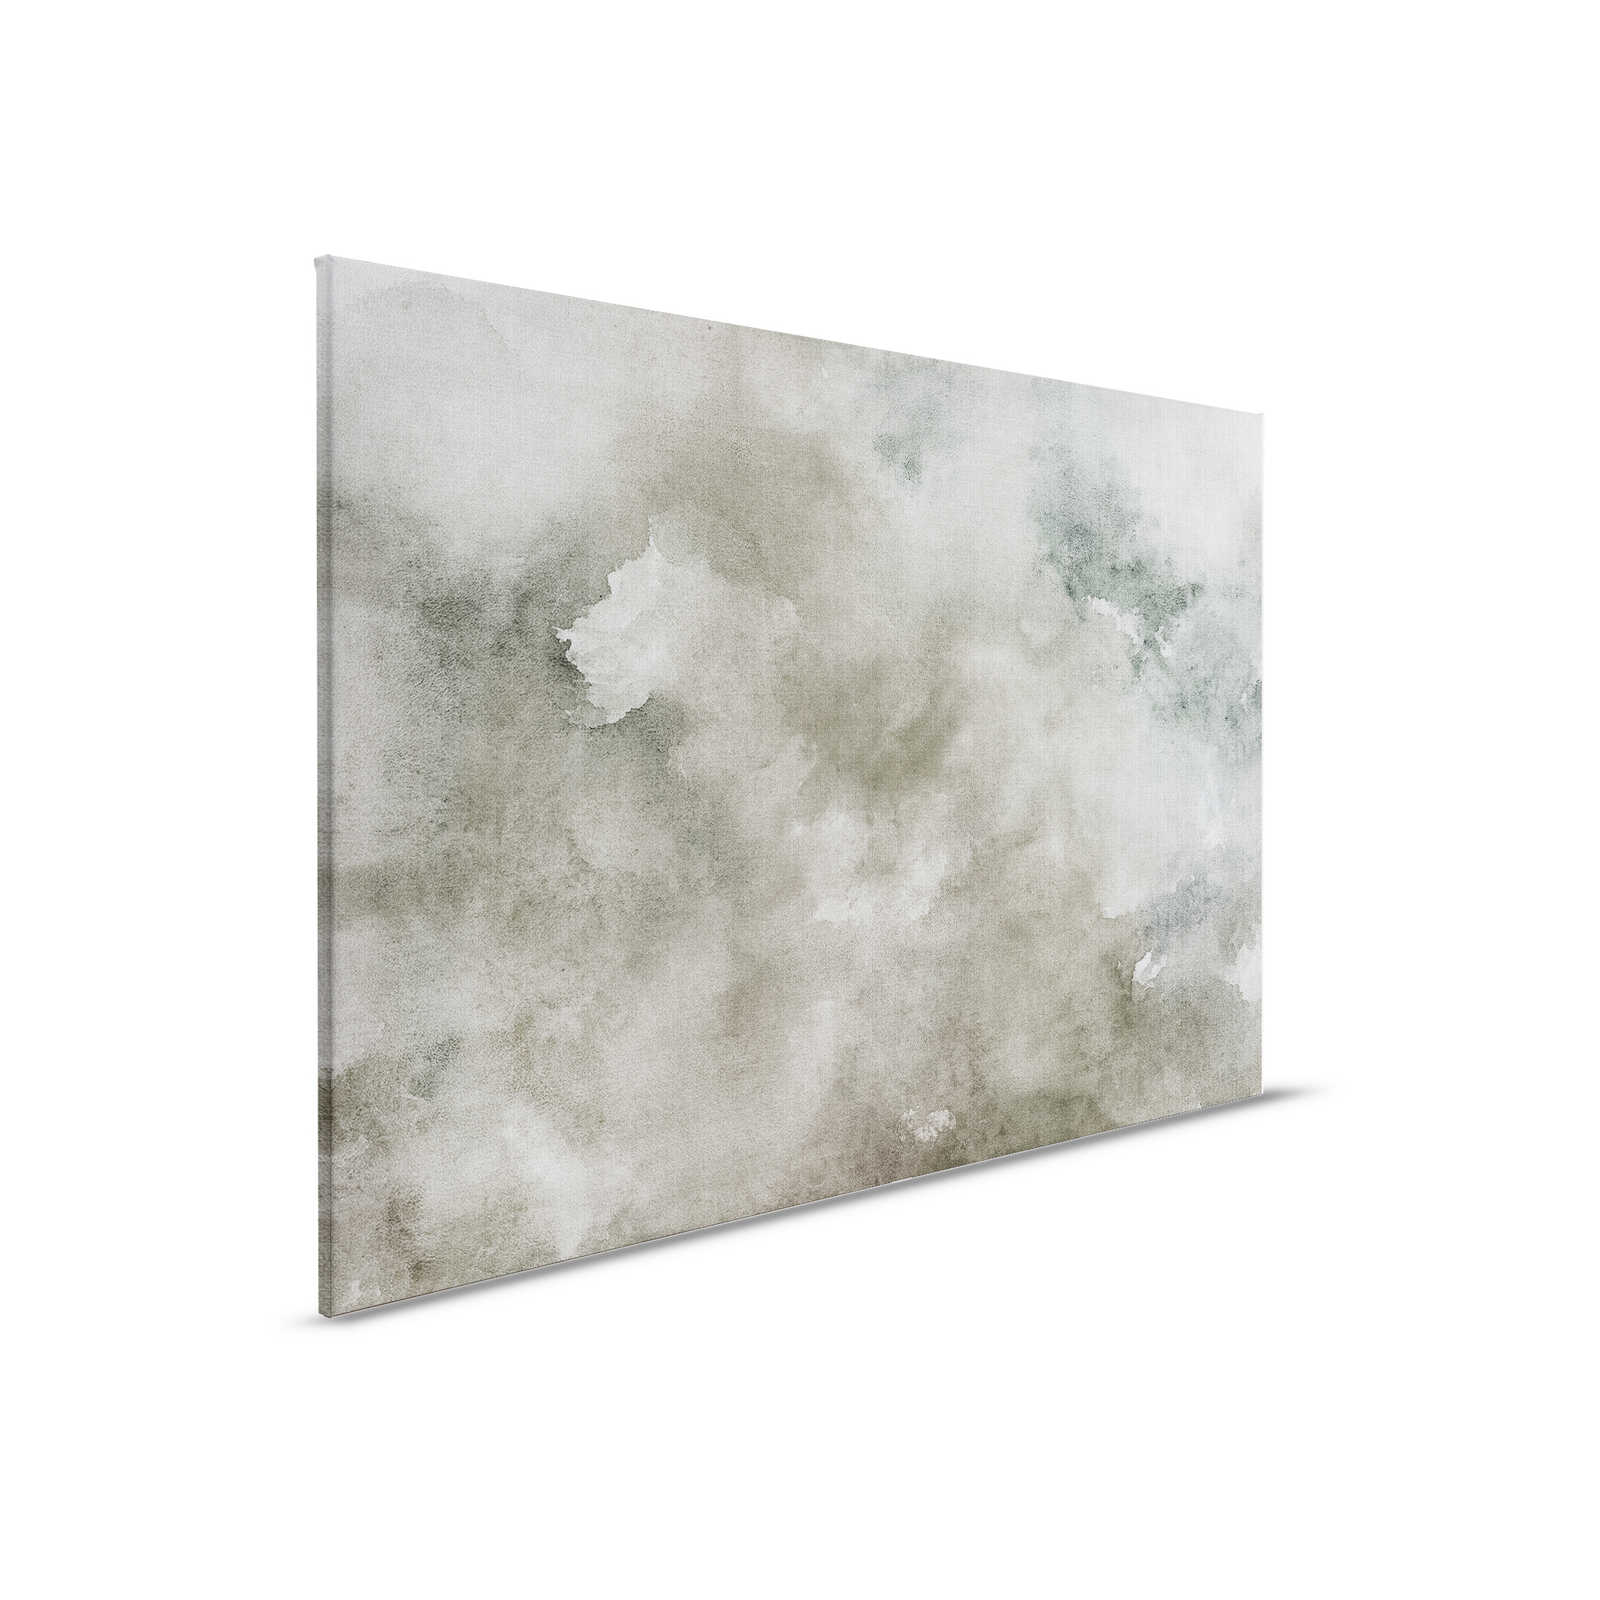 Watercolours 1 - Grey watercolour canvas painting in natural linen look - 0.90 m x 0.60 m
